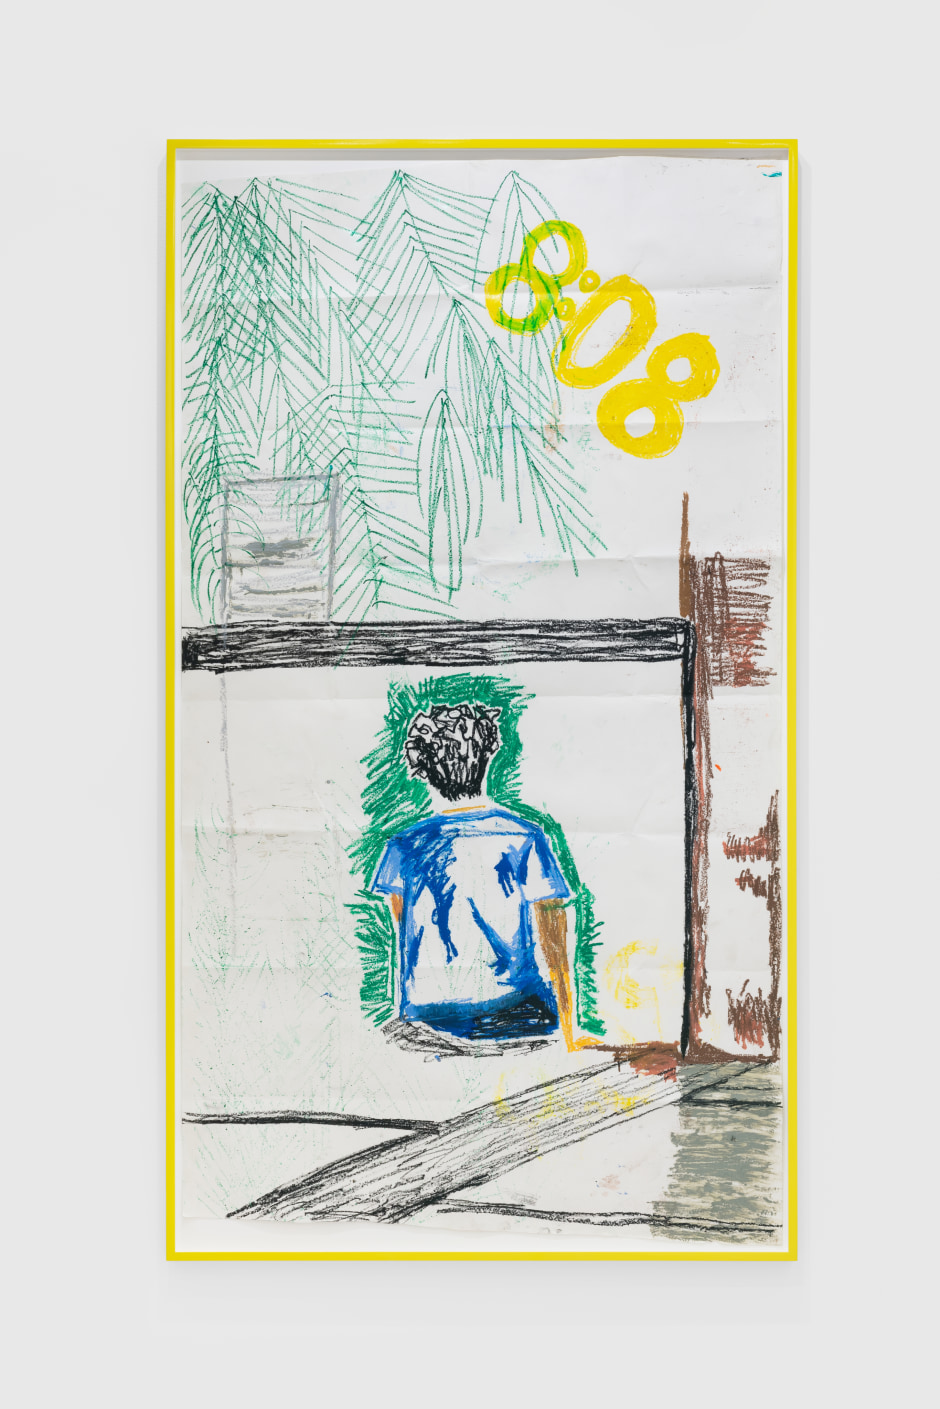 Martine Syms  808, 2022  oil stick on paper  194 x 106 cm / 76 ⅜ x 41 . in  808, 2022, is a new drawing by Martine Syms that forms part of a recent body of work marking the first time Syms exhibited work in this media, first shown at Sadie Coles HQ in Summer 2021. While Syms is best known for her research-based practice in new media, performance and film, she has continuously engaged drawing as a preliminary practice to aid her creative process – in a similar vein to her published journal writings.  Made variously in oil stick and watercolour marker, the subject matter and the works’ titles portray intuitively rendered snapshots of everyday life; in 808, a seated figure glimpsed in abstract on a leafy terrace. Each drawing is conveyed with intimate, diaristic candour, isolating a fleeting moment of encounter against an abstract grounds: a broken belt, a couple making out. Reflecting Syms’ ongoing exploration of narrative, identity, and processes of self-making – in which she regularly draws upon her own personal experience – the drawing evokes a mood of reflection and melancholia, delineating the boundary of the public and private self.